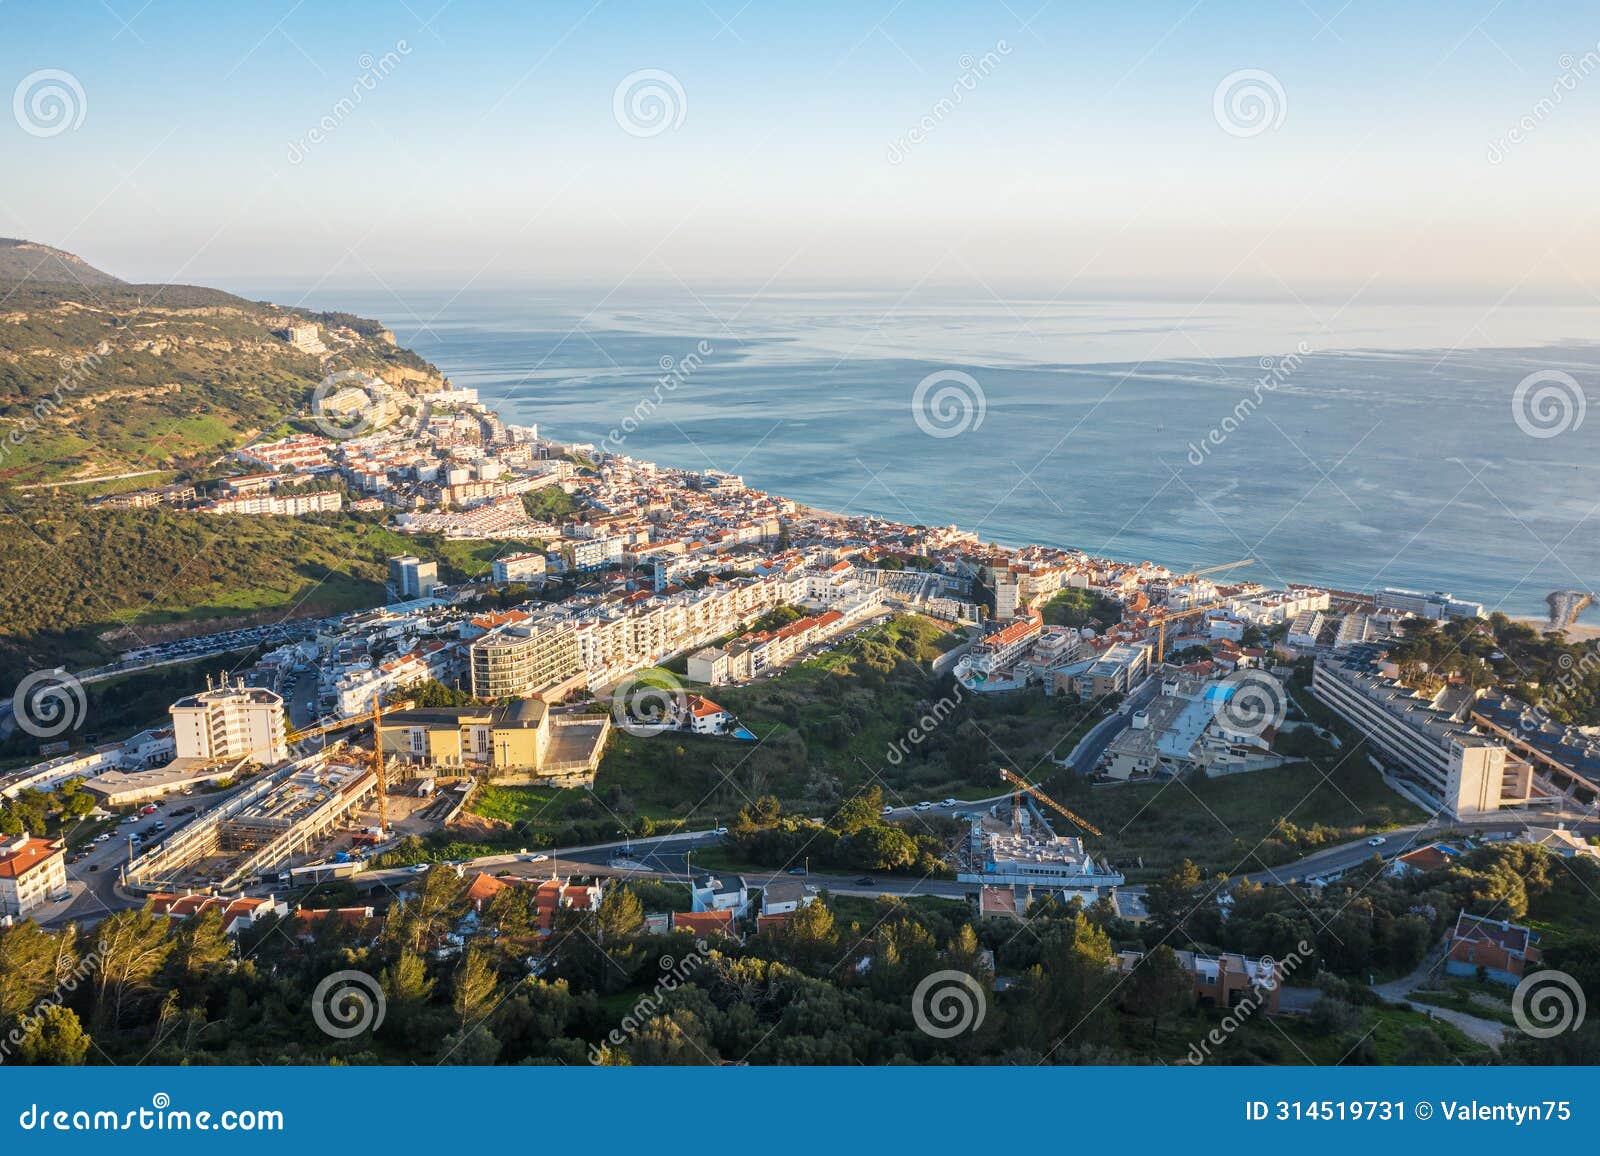 drone aerial view on sesimbra, fishing town in setubal district in portugal